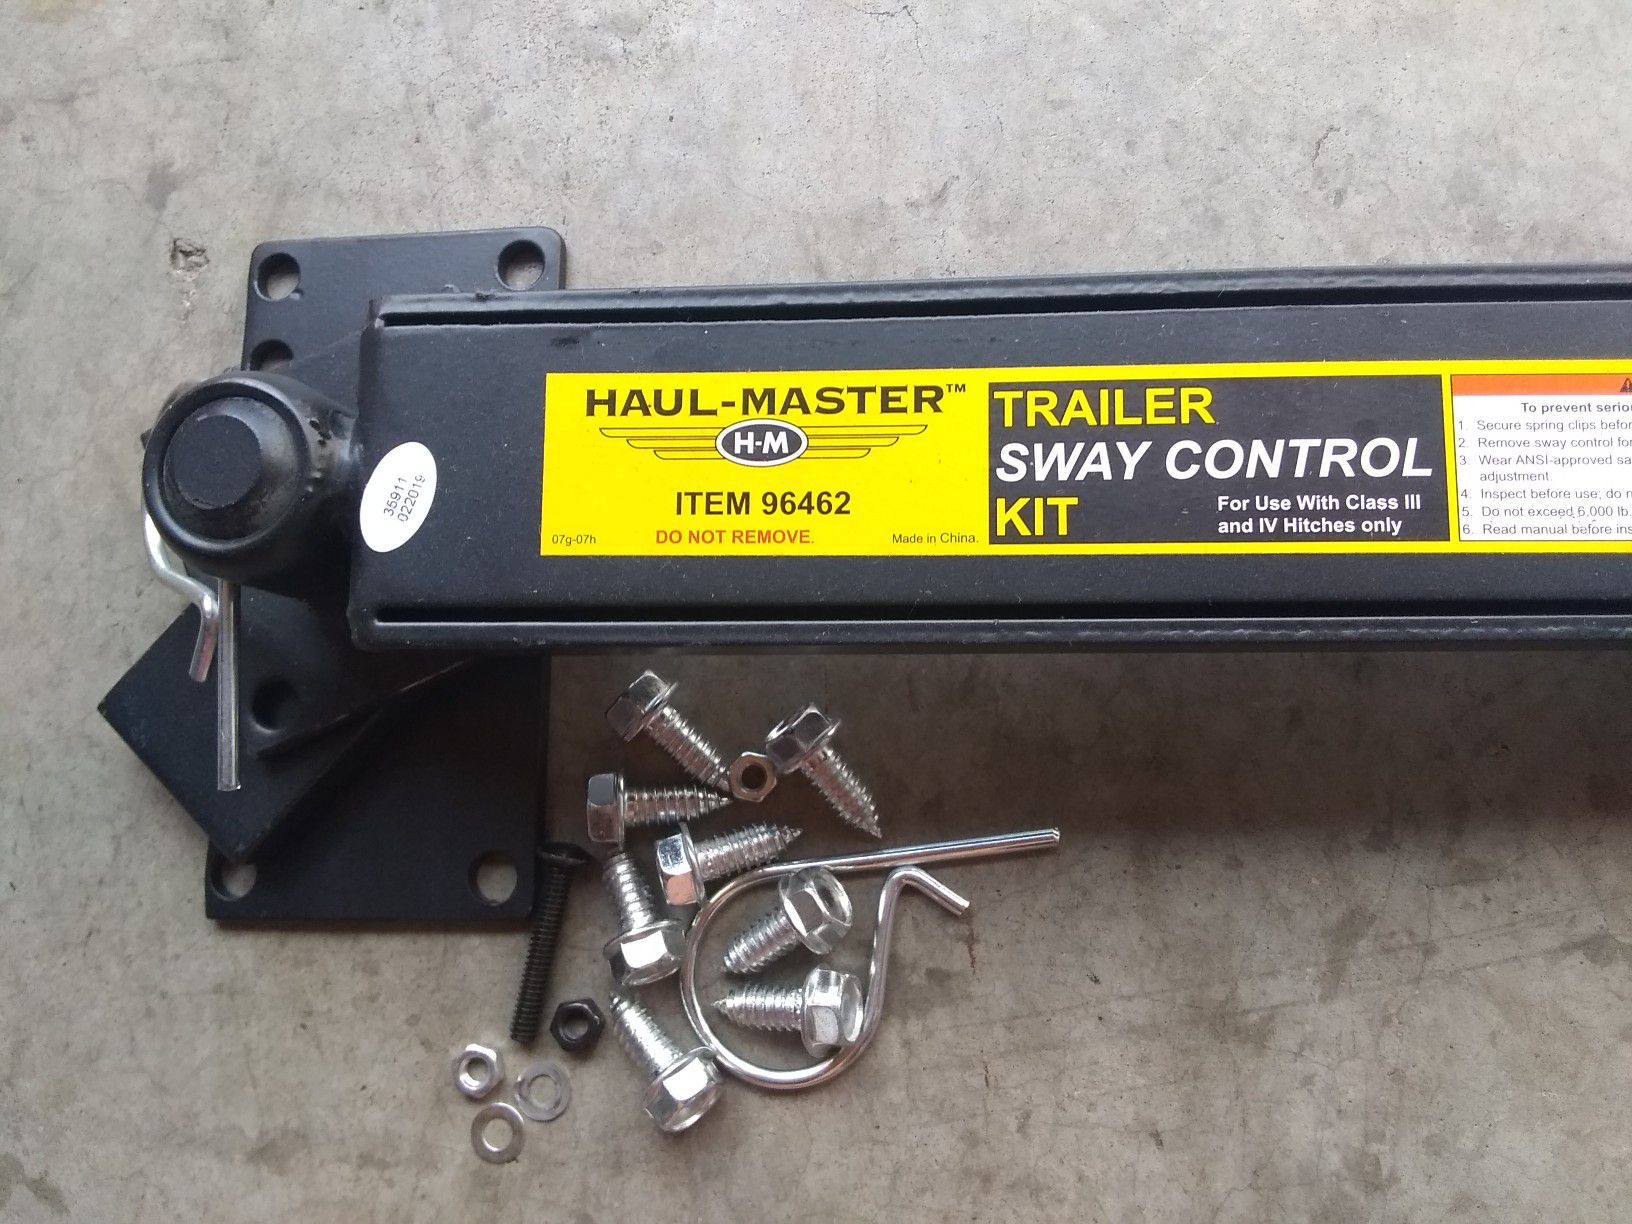 Trailor sway control kit